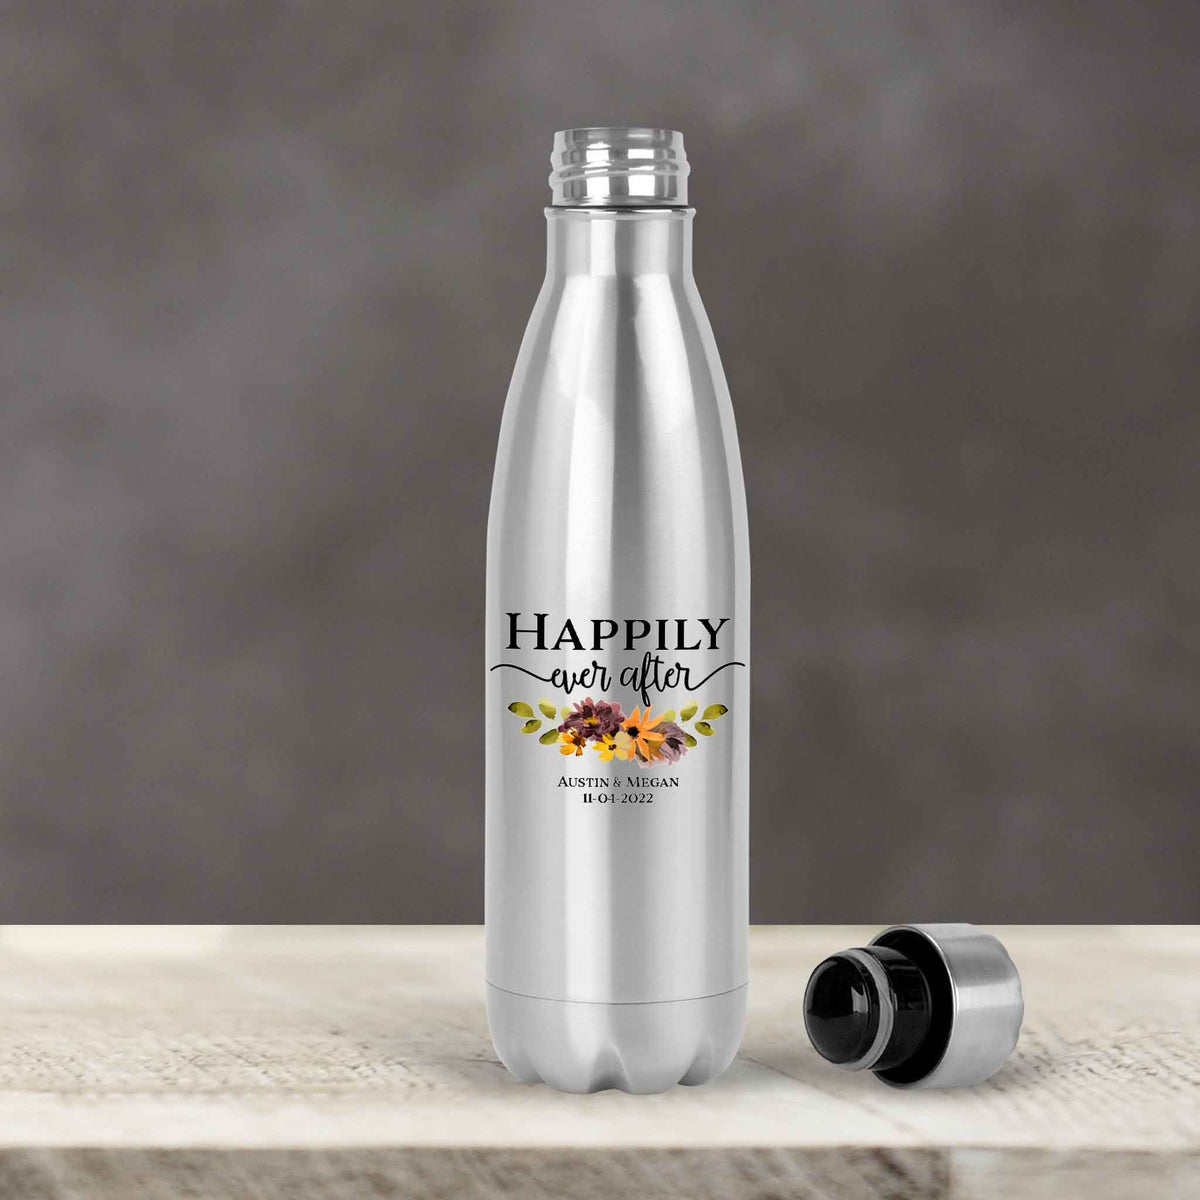 Personalized Water Bottles | Custom Stainless Steel Water Bottles | 30 oz | Happily Ever After Fall Floral